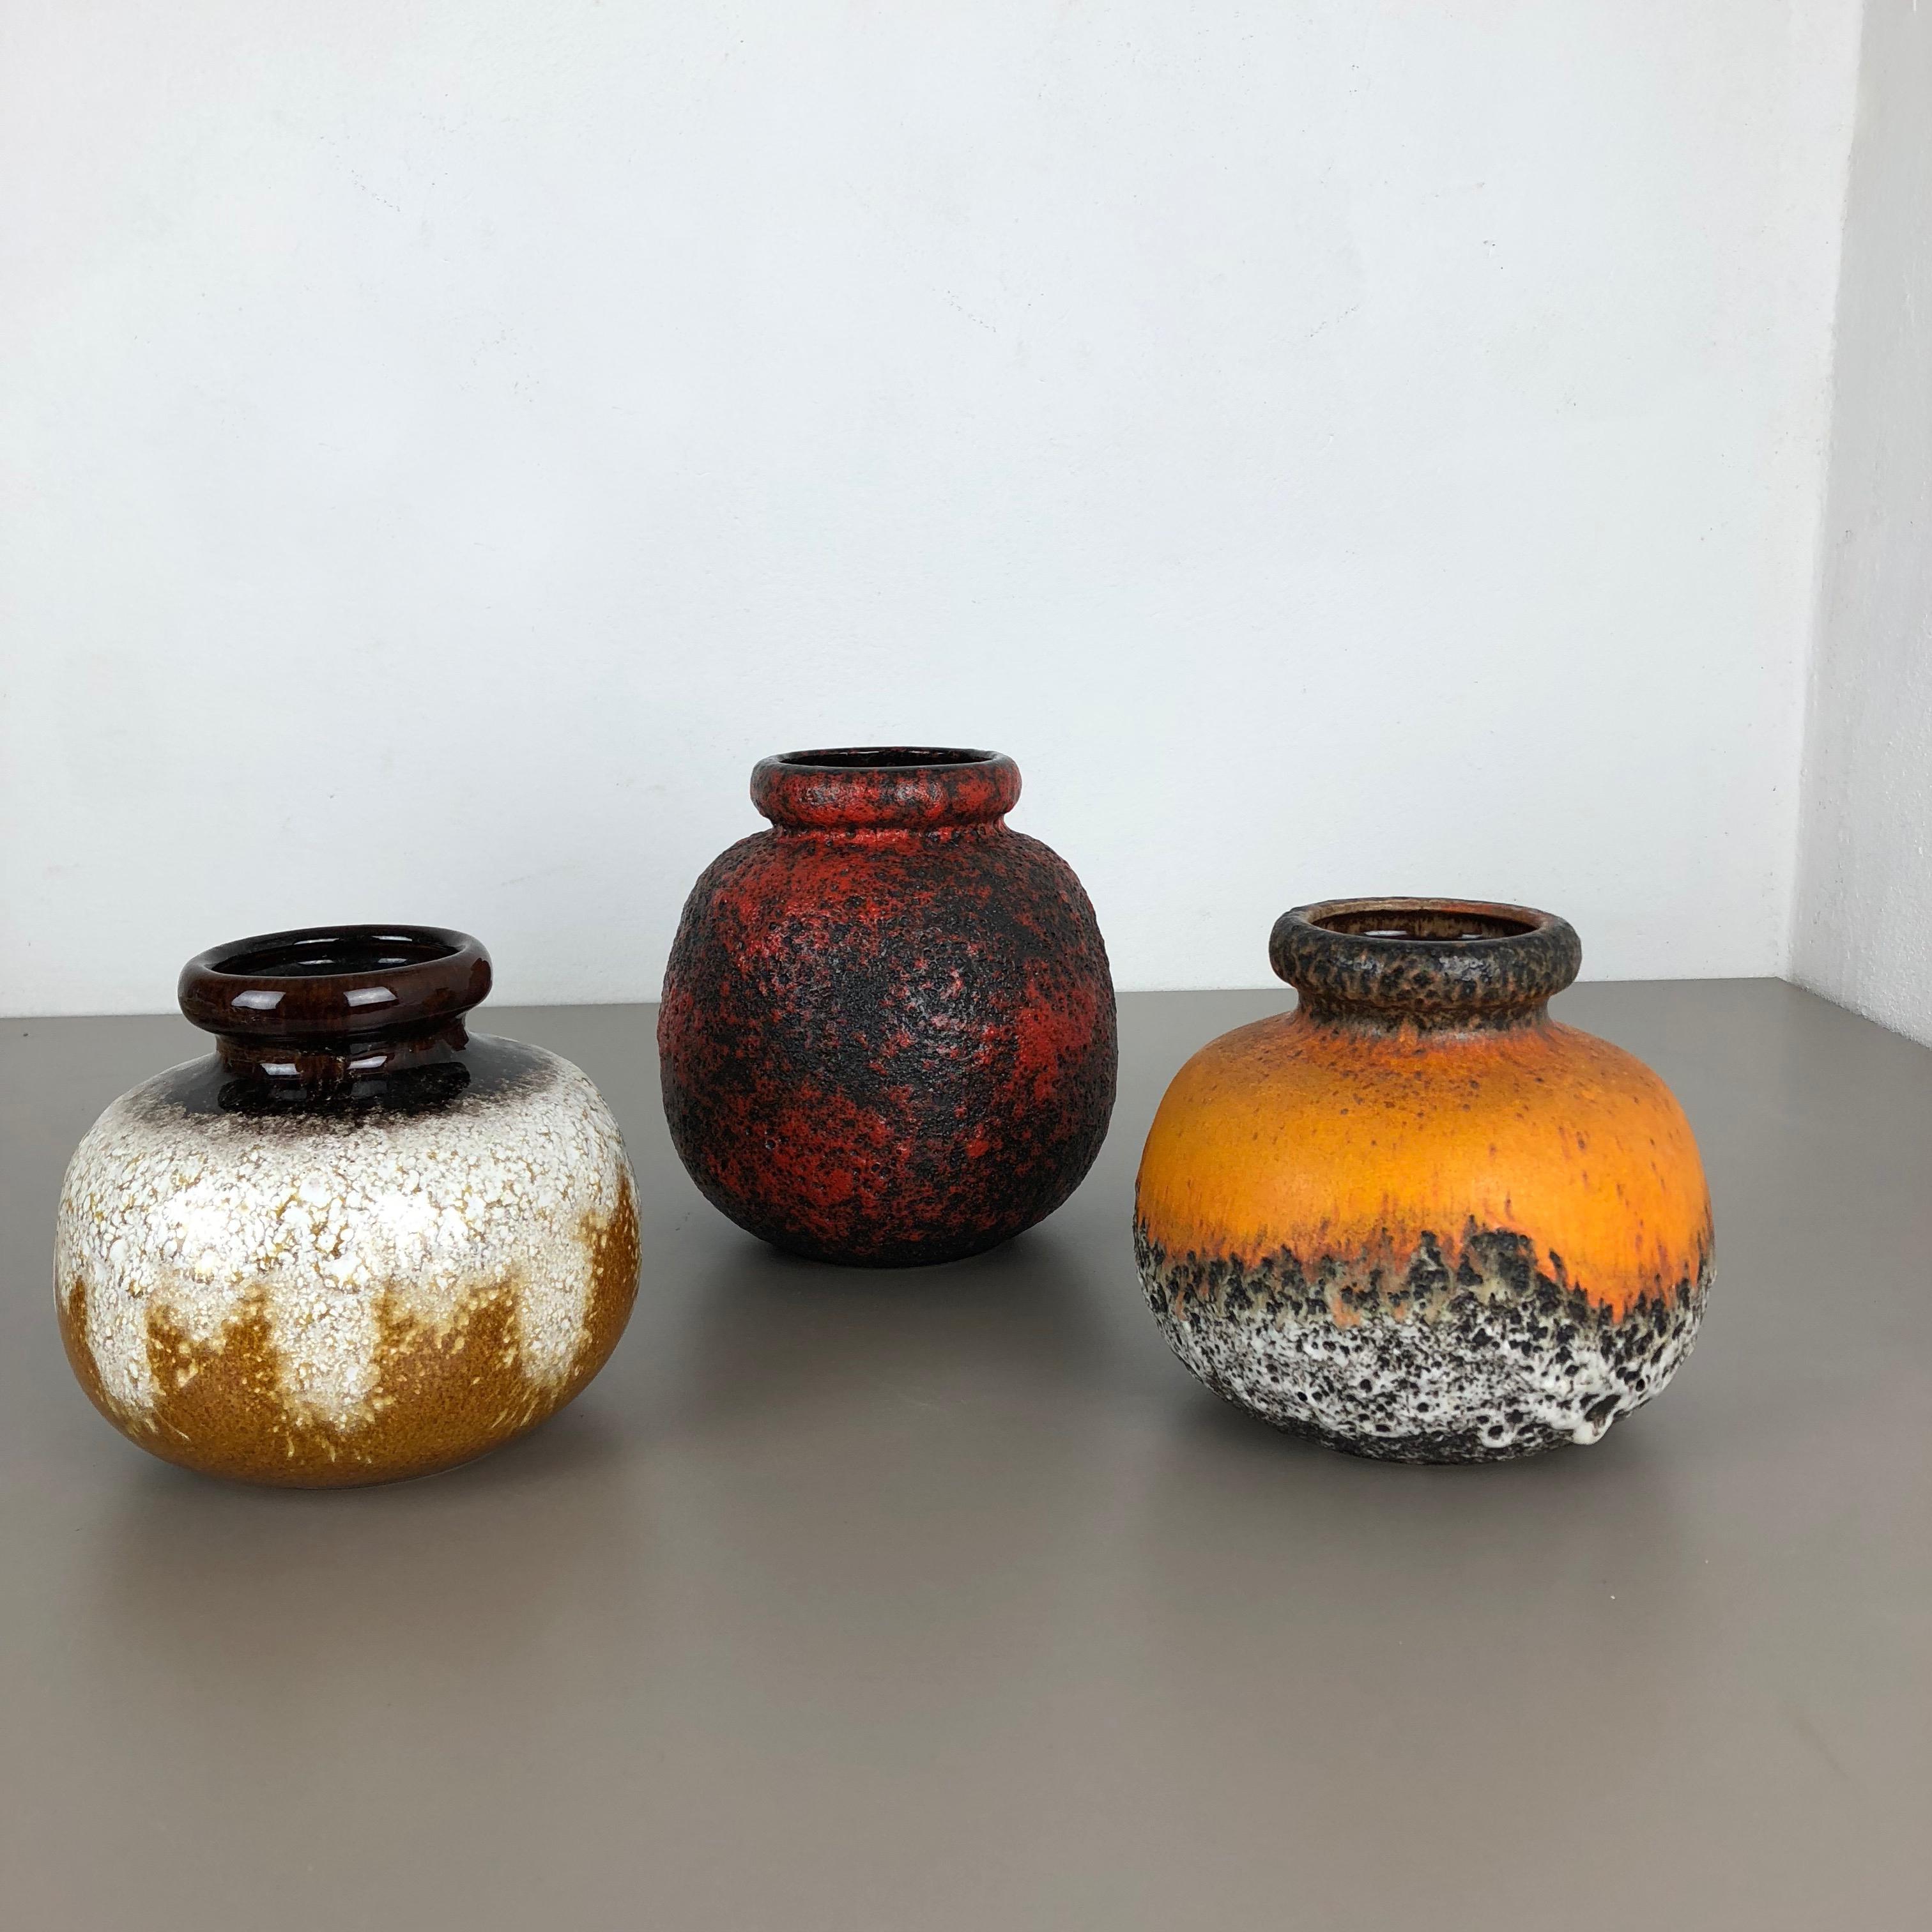 Article:

Set of three fat lava art vases

Model:
234-15
284-19



Producer:

Scheurich, Germany



Decade:

1970s




These original vintage vases was produced in the 1970s in Germany. It is made of ceramic pottery in fat